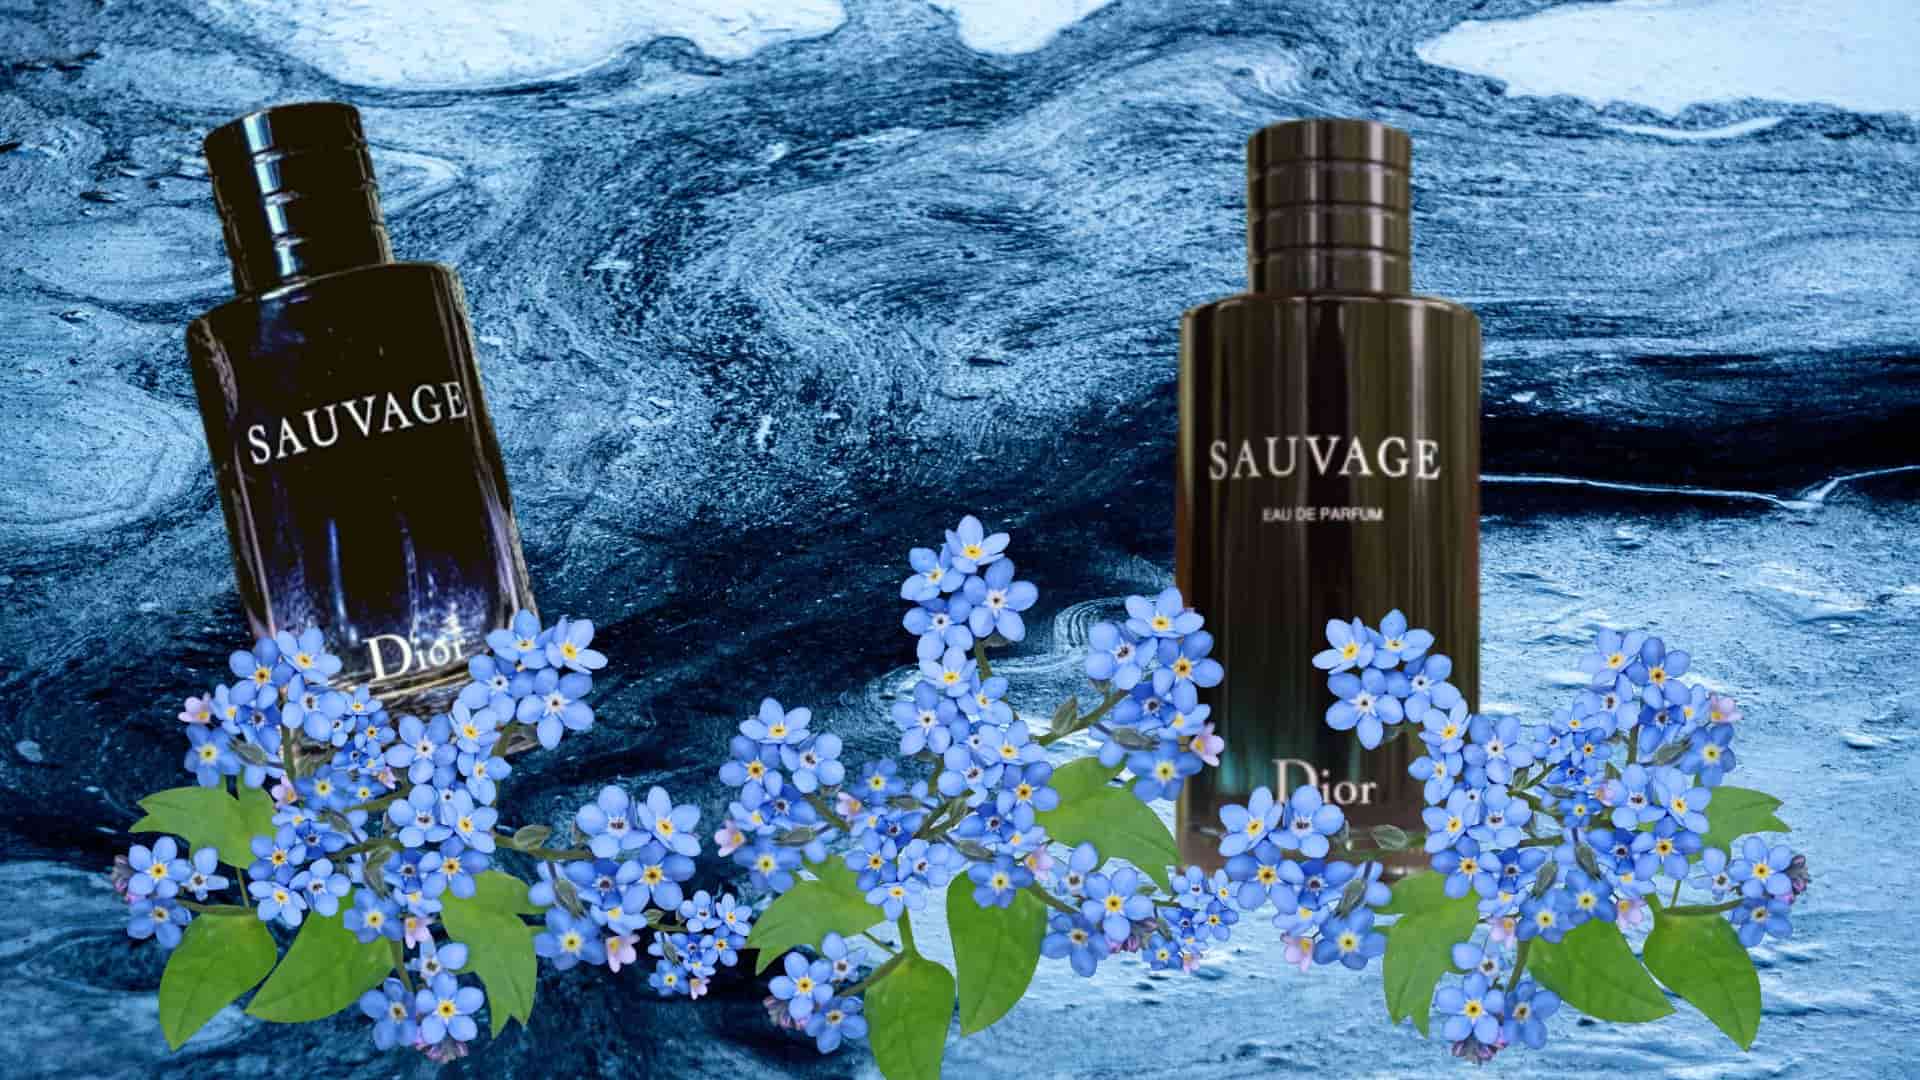 Dior Sauvage - 4 Pros and Cons of this mesmerizing perfume